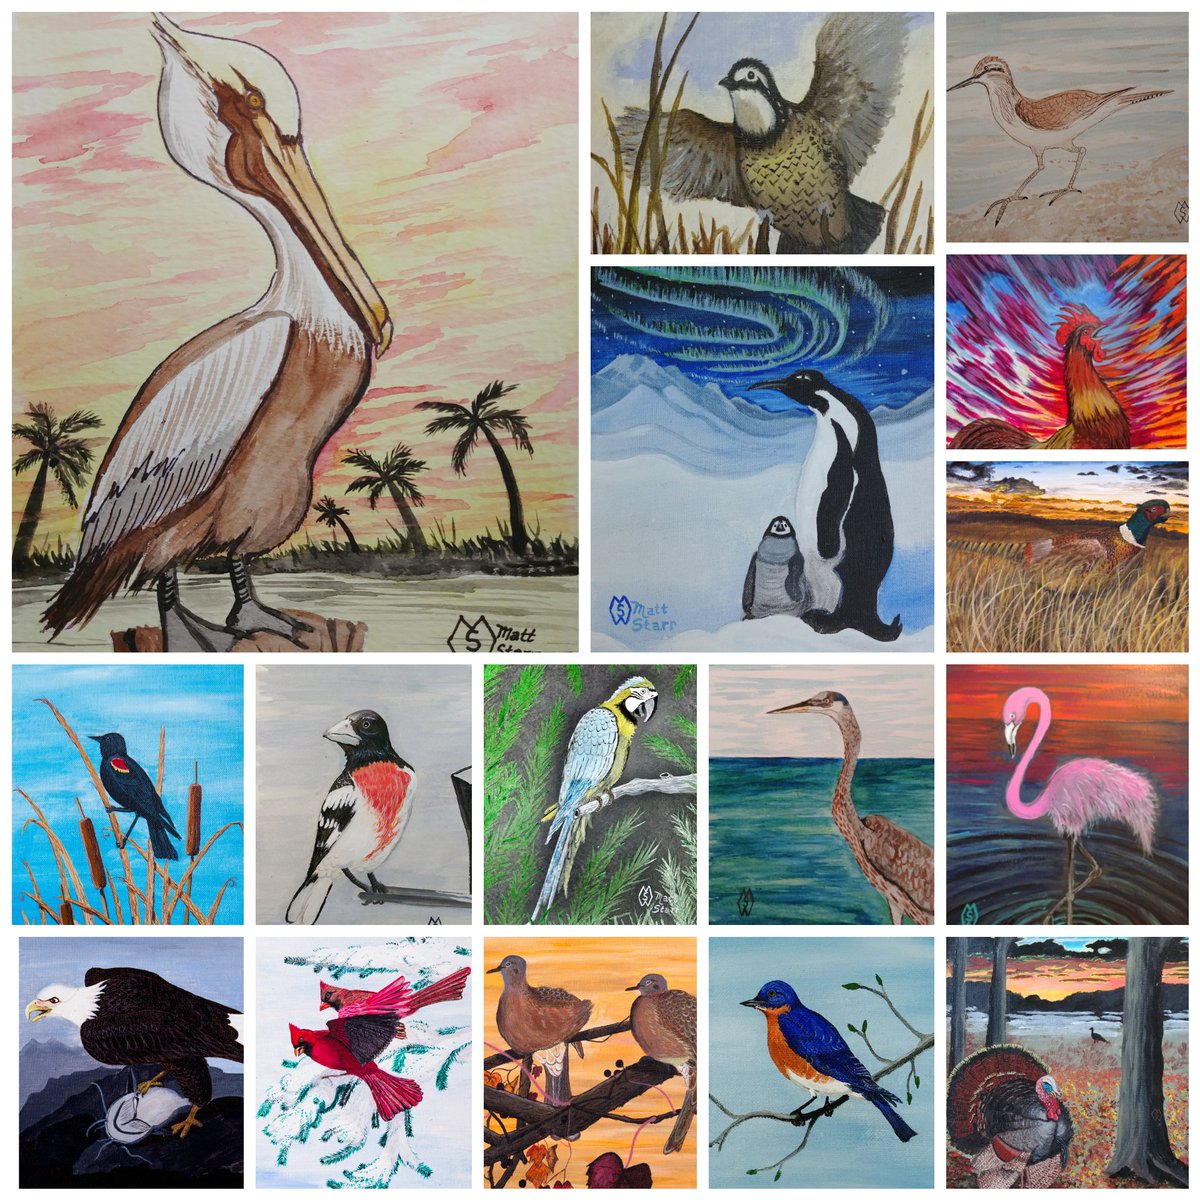 April 27th is National Go Birding Day. Here are some of my paintings with birds, which are one of my favorite subjects to paint! teepublic.com/user/matt-star…
#mattstarrfineart #artistic #gift #giftideas #tshirts #homedecor #art #bird #birds #animals #wildlife #gobirding #birdwatchers